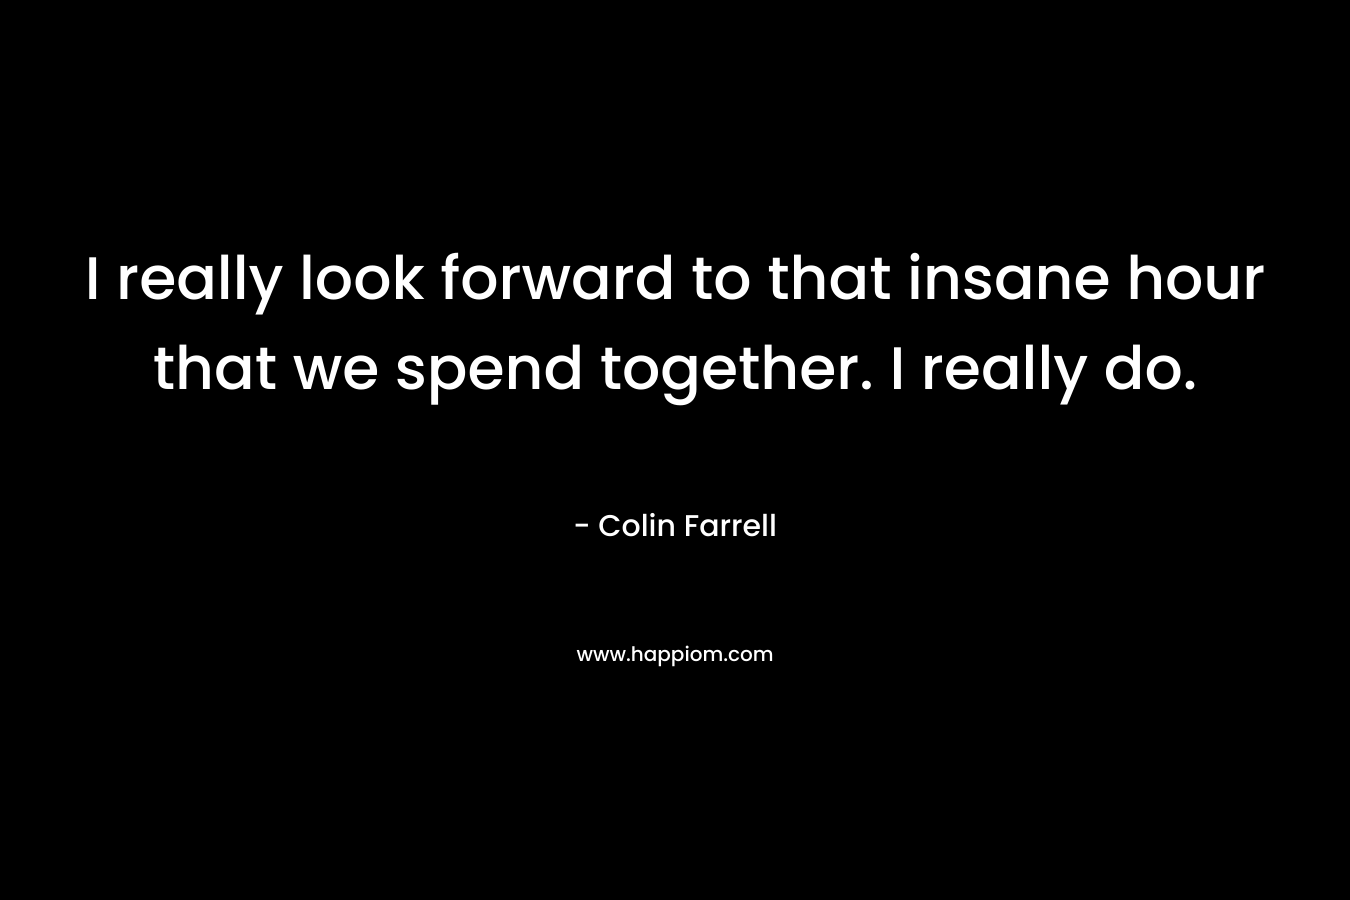 I really look forward to that insane hour that we spend together. I really do.